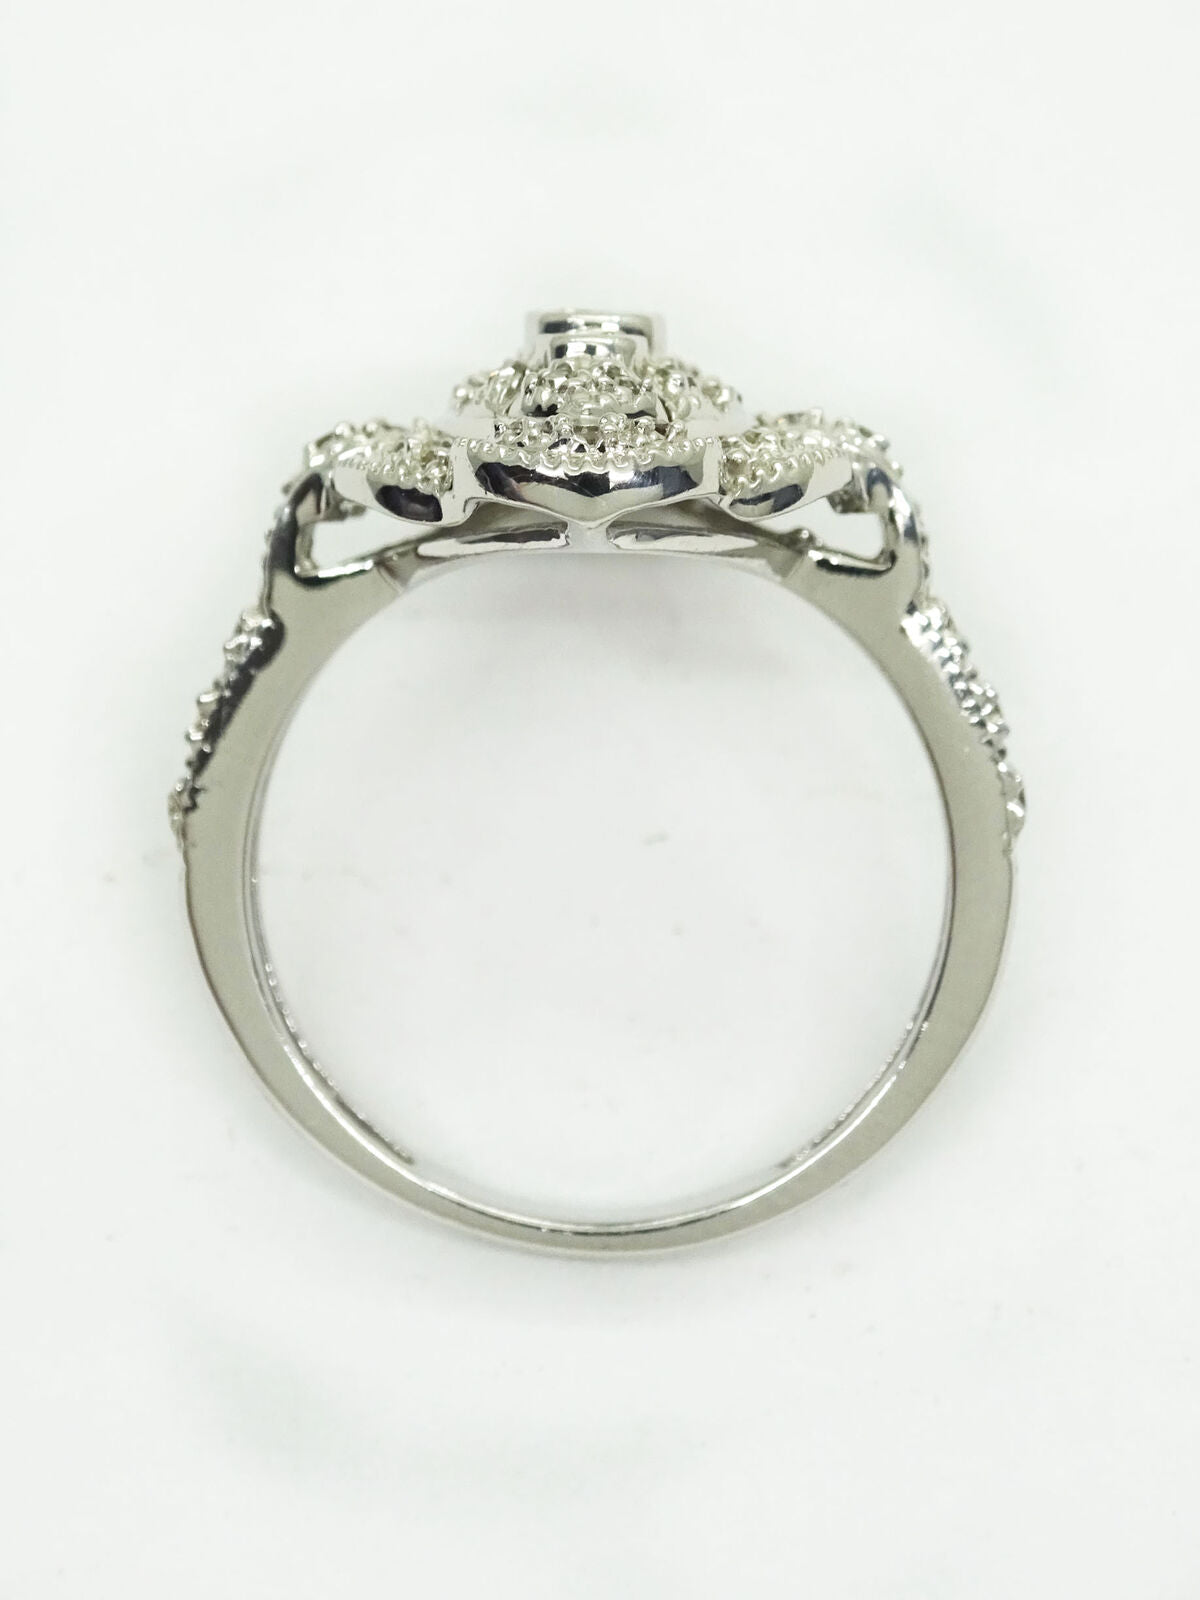 0.38ct tw Earth Mined Diamond Ring 14k White Gold Size 7.25